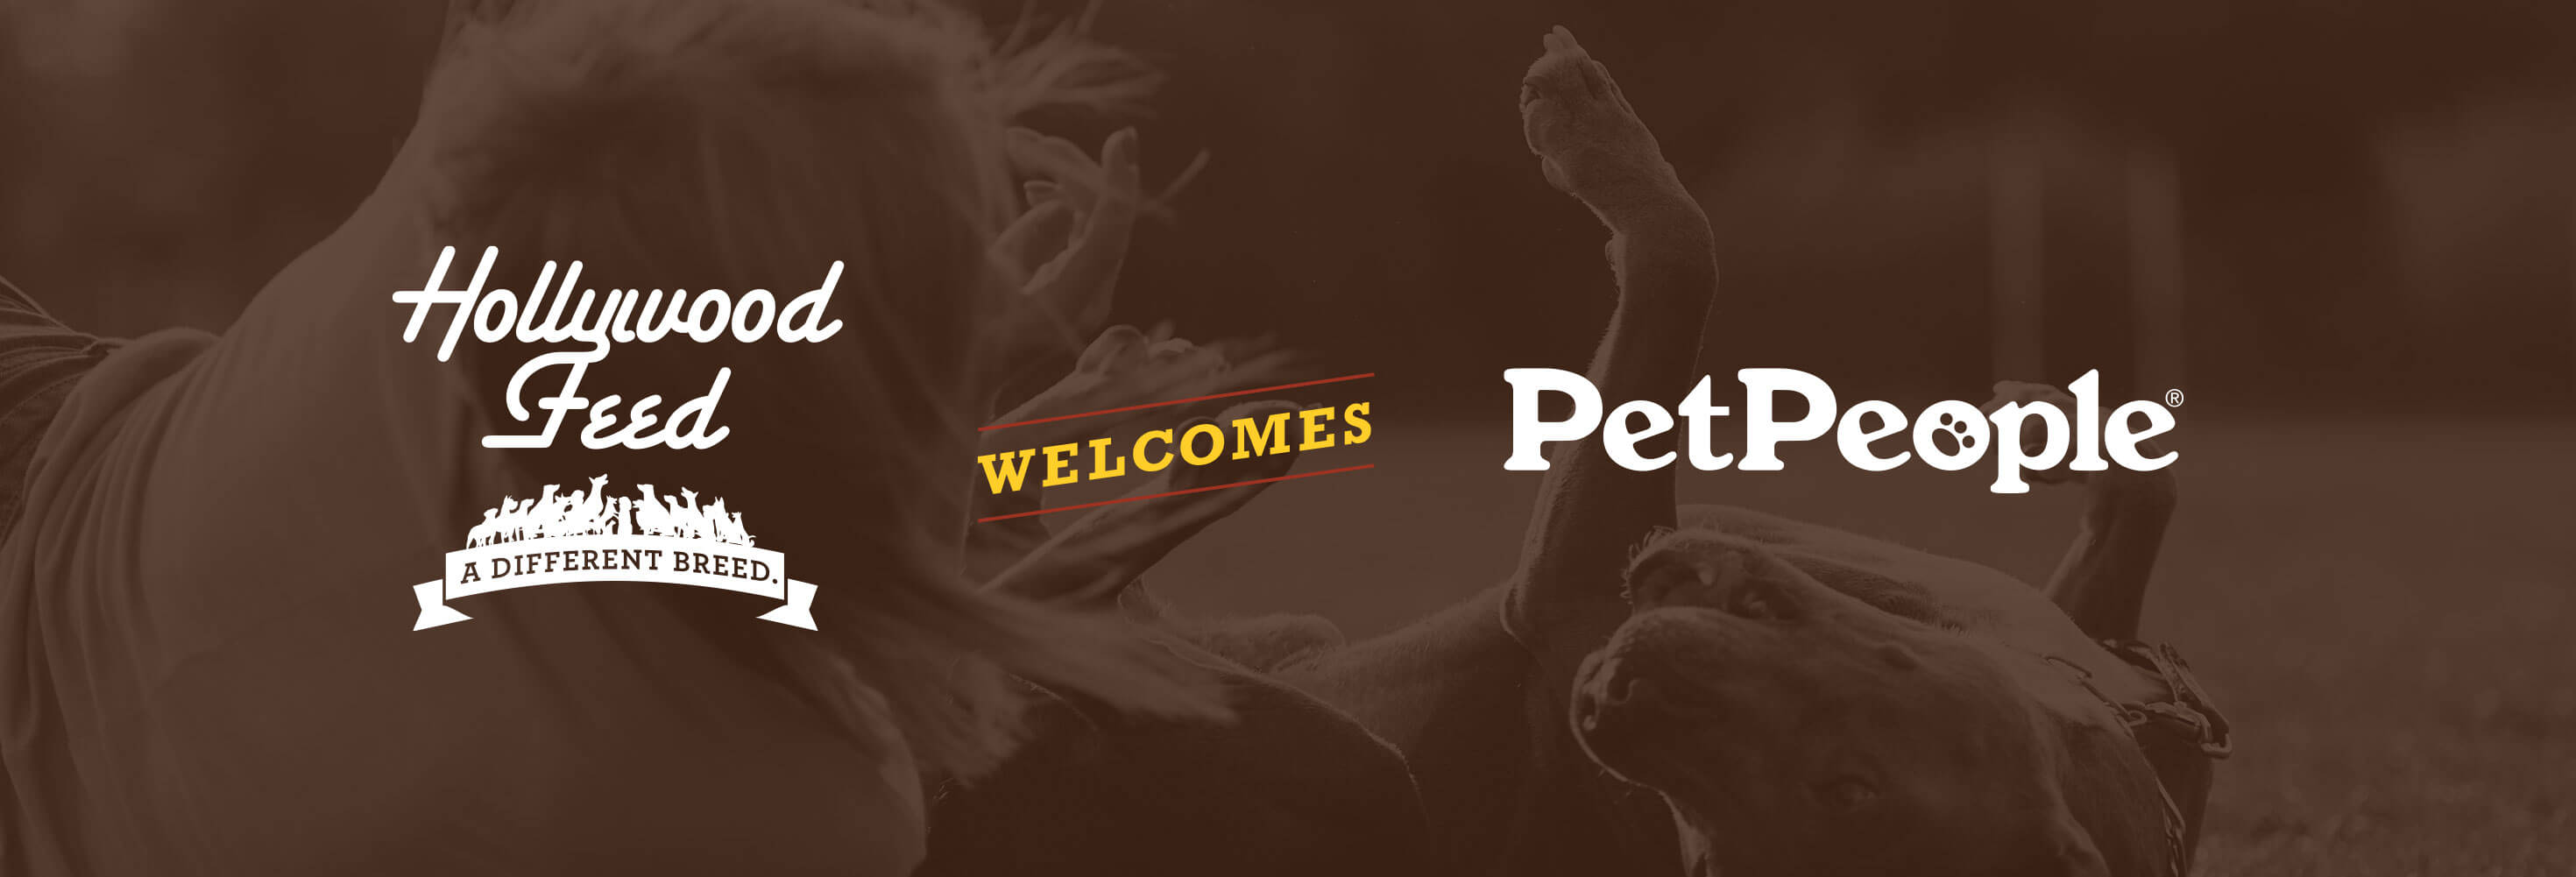 Hollywood Feed Welcomes Pet People!